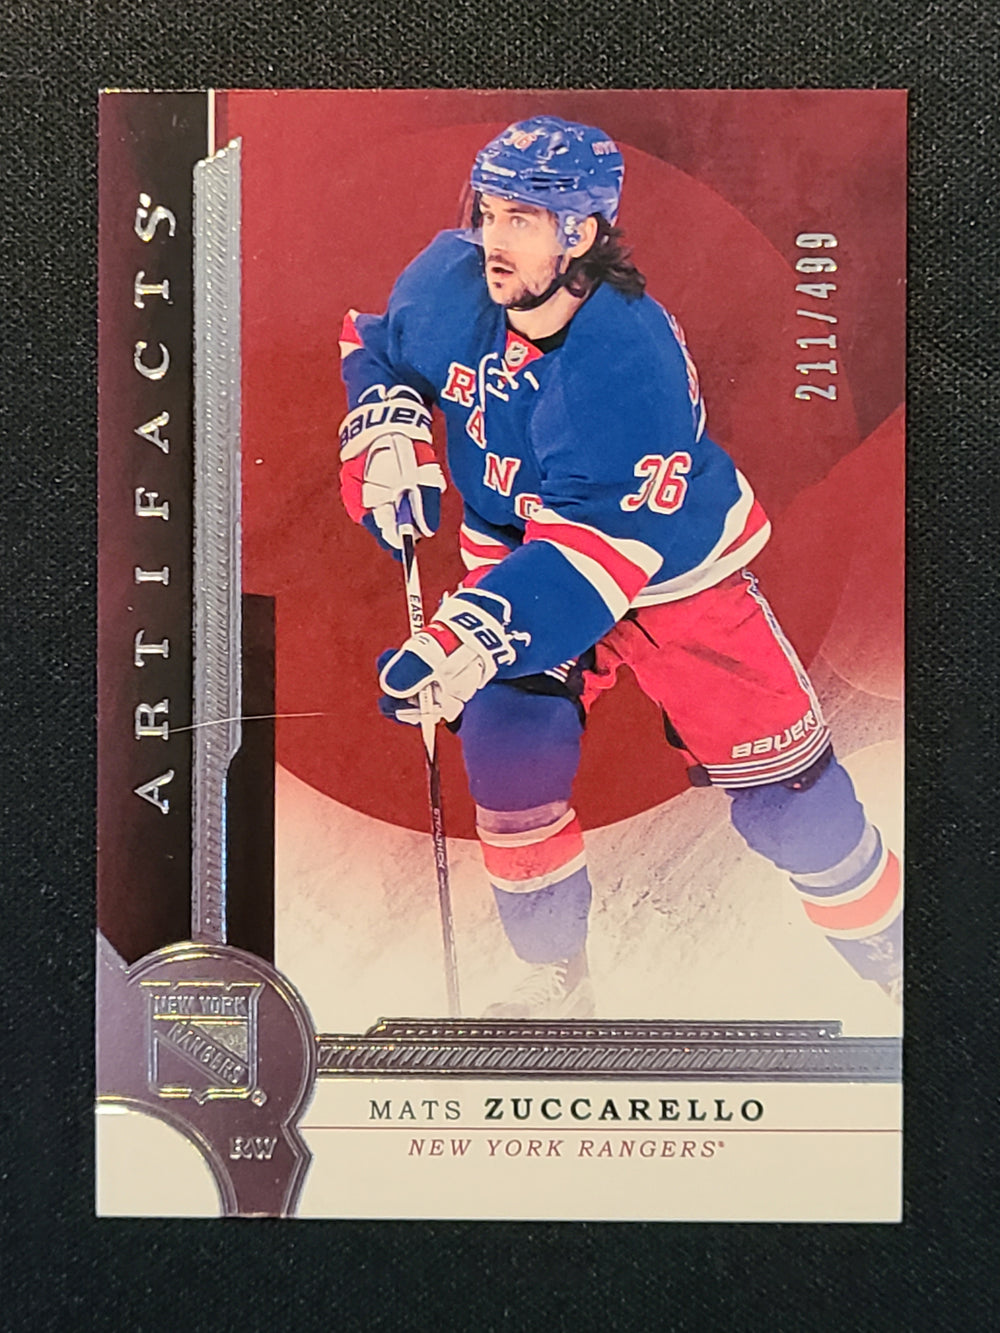 2016-17 Artifacts Ruby Parallel #103 Mats Zuccarello NY Rangers 211/499